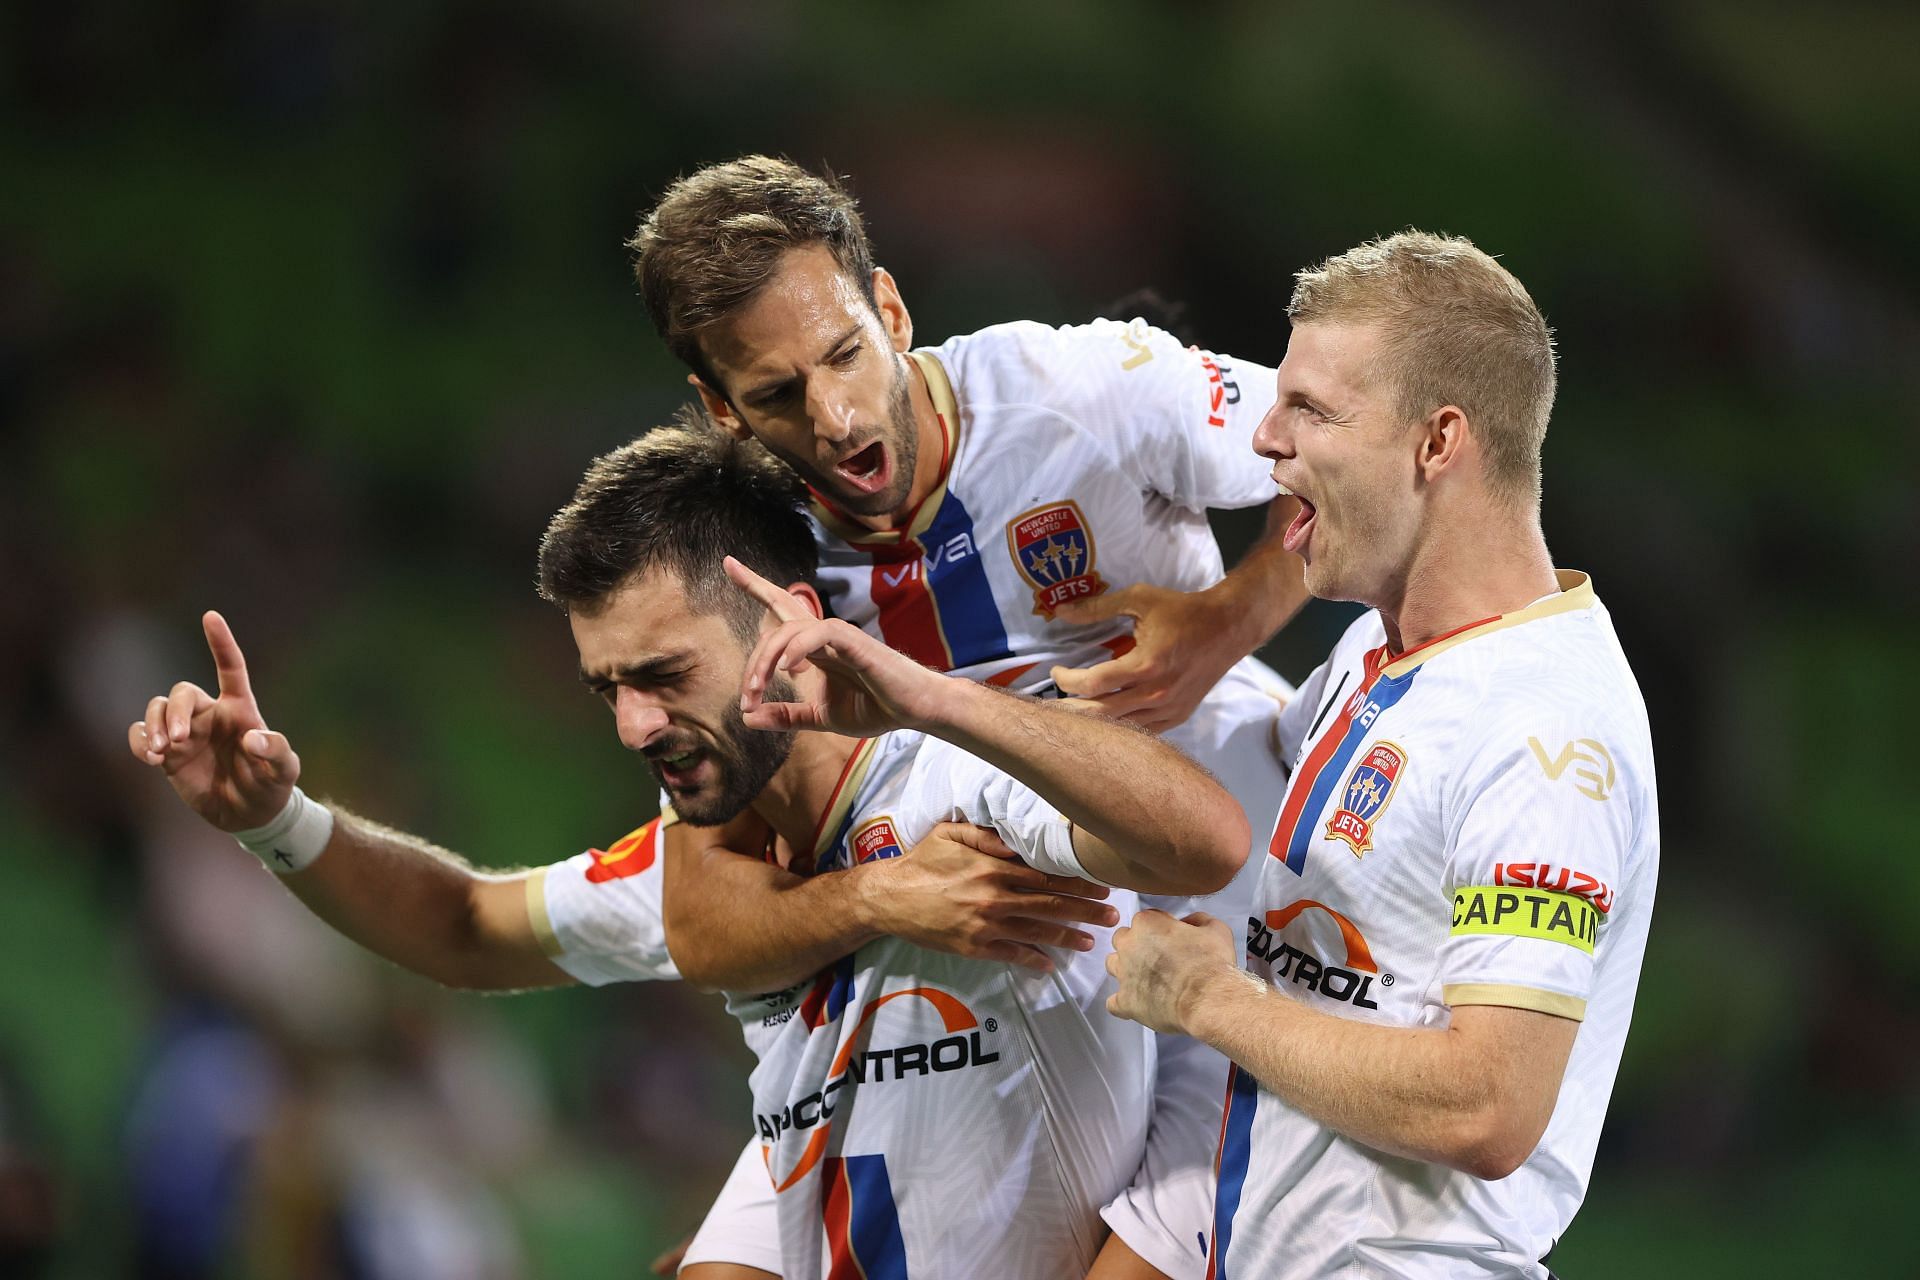 Newcastle Jets will host Macarthur on Saturday